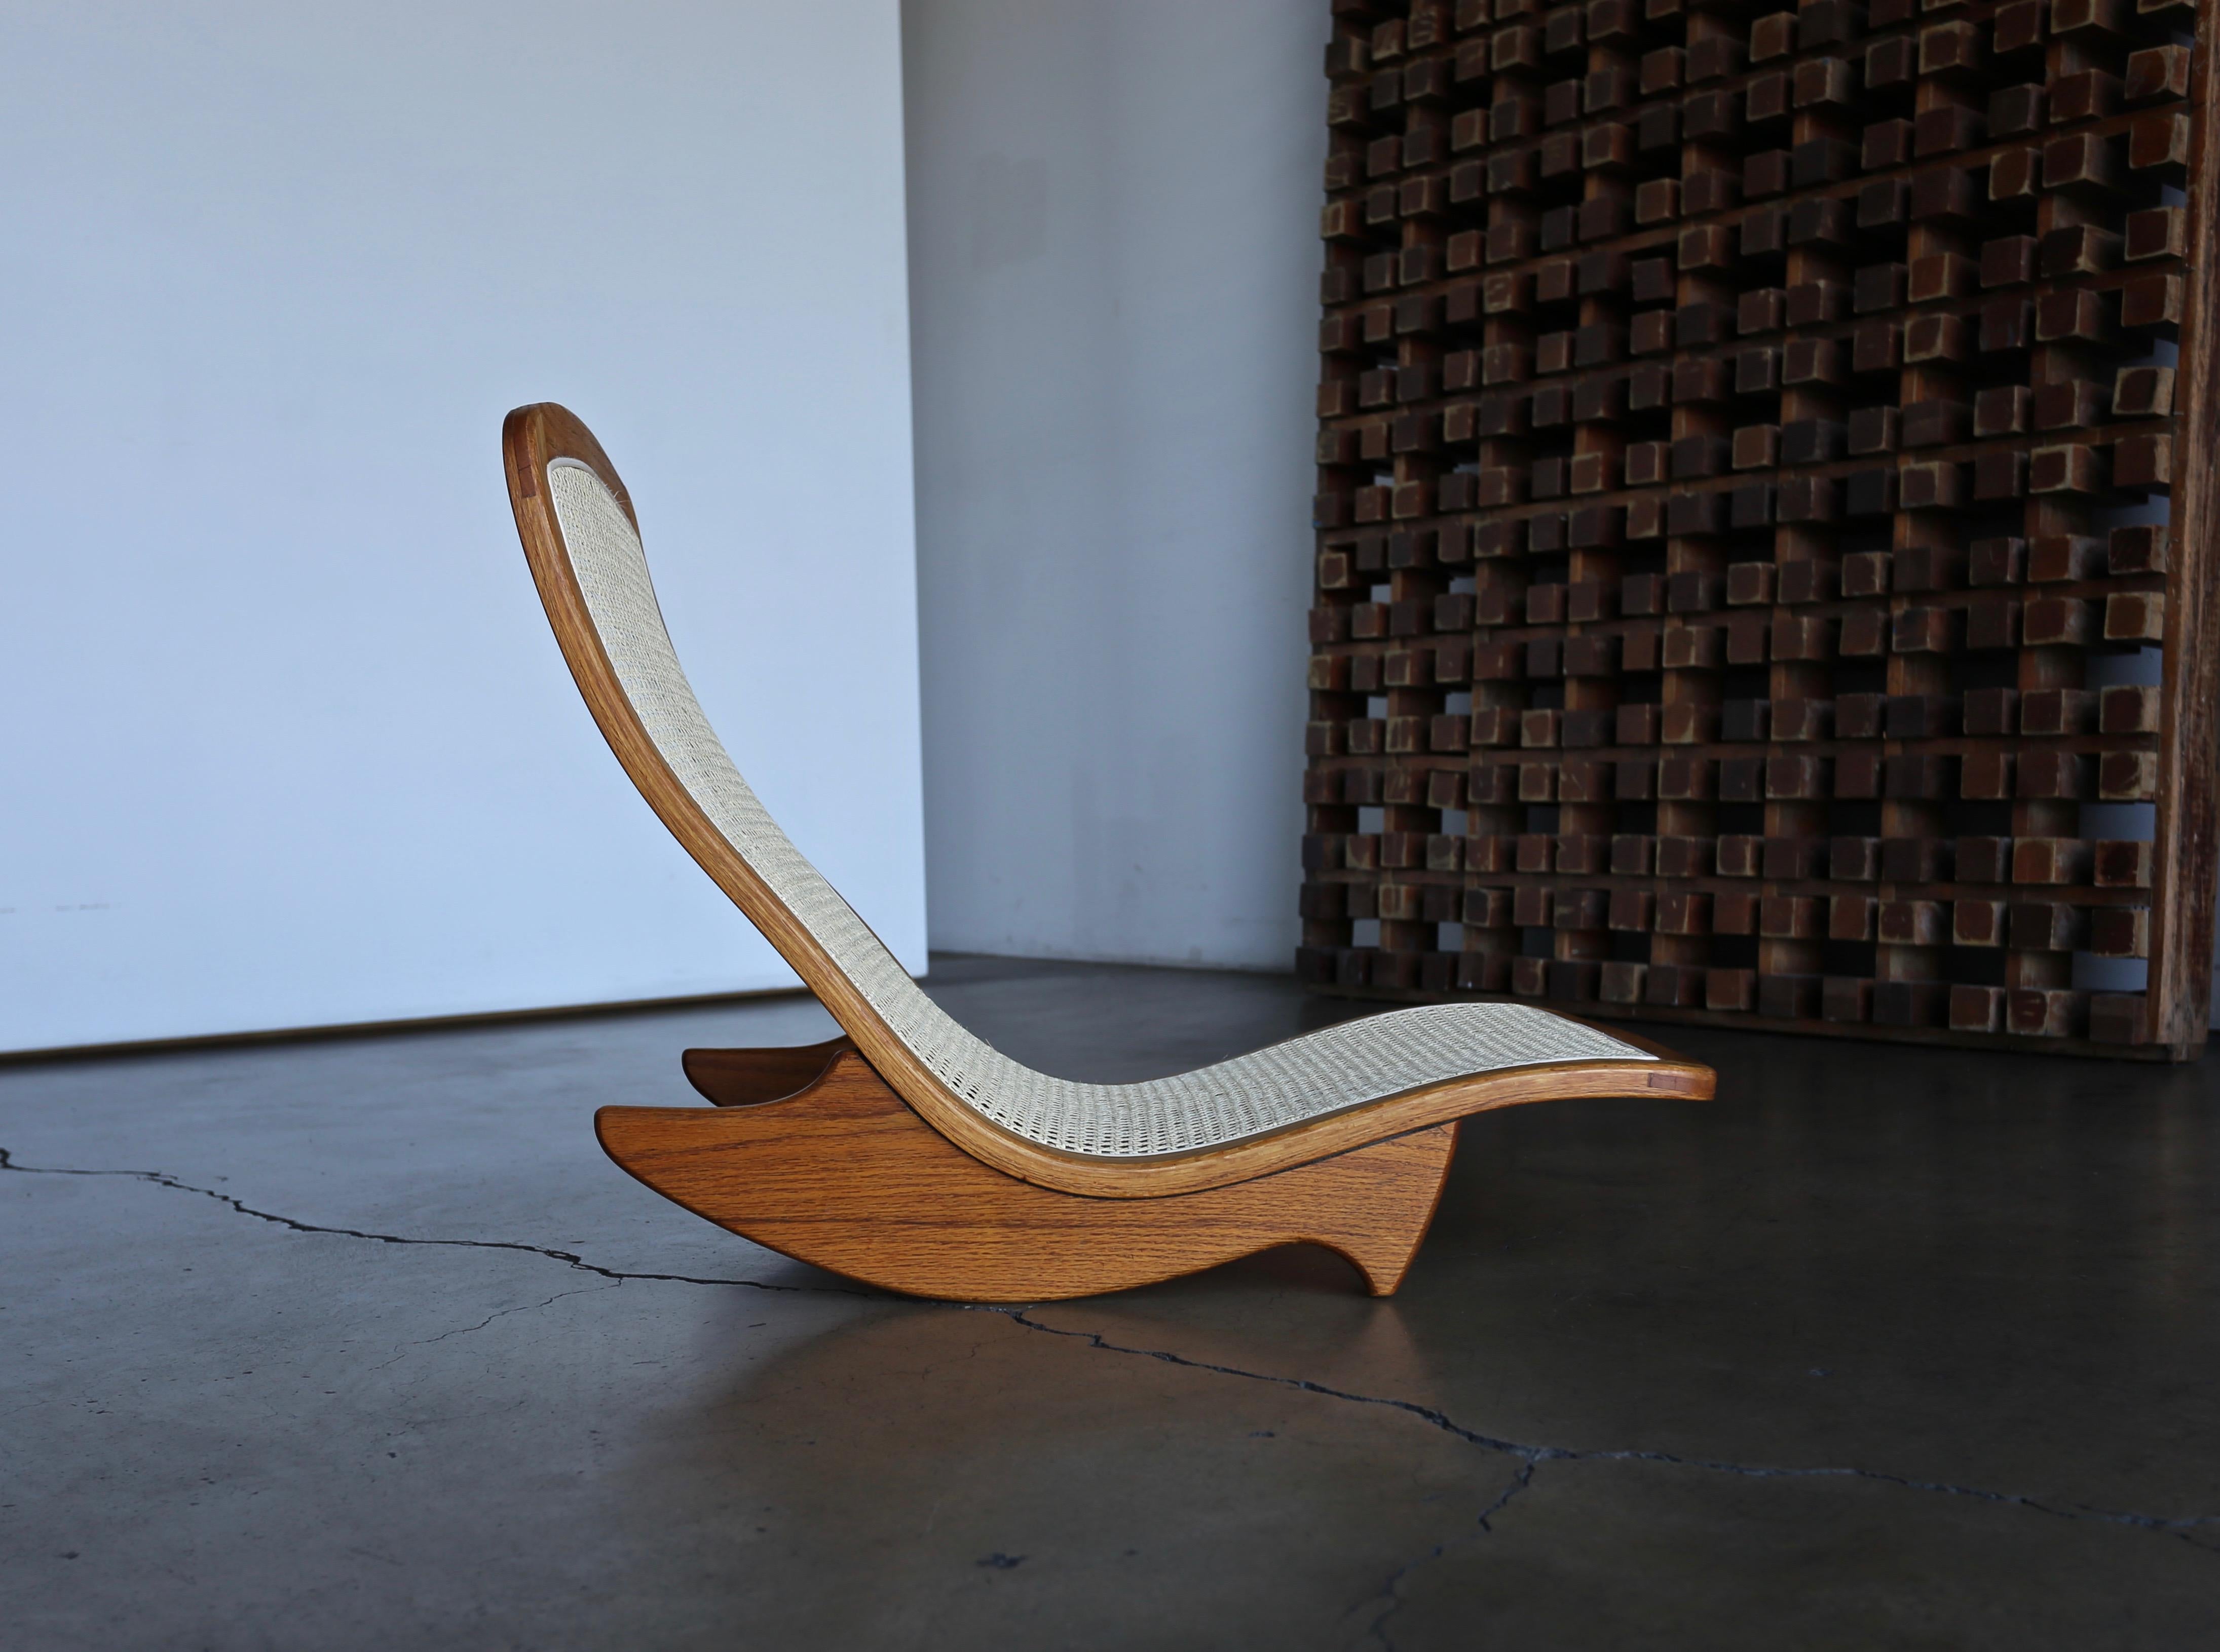 Handcrafted low rocker in oak and cane by California Artist, Steven Rieman. The design was exhibited at the Pasadena Museum of Art as part of the seminal California Design 76. Rieman was a graduate of the prestigious ArtCenter College and moved to a